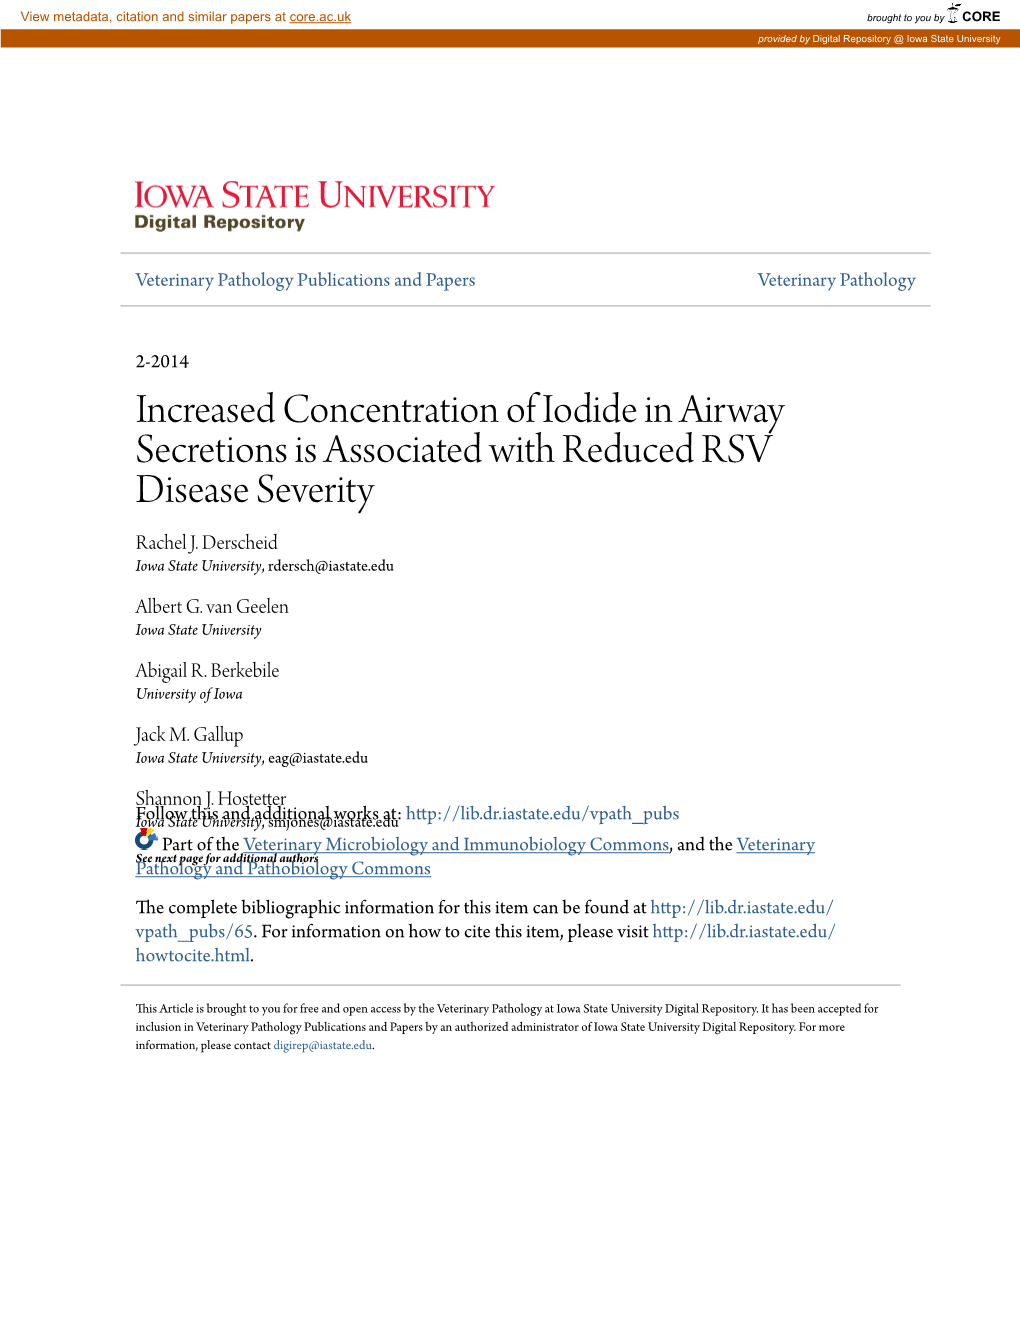 Increased Concentration of Iodide in Airway Secretions Is Associated with Reduced RSV Disease Severity Rachel J